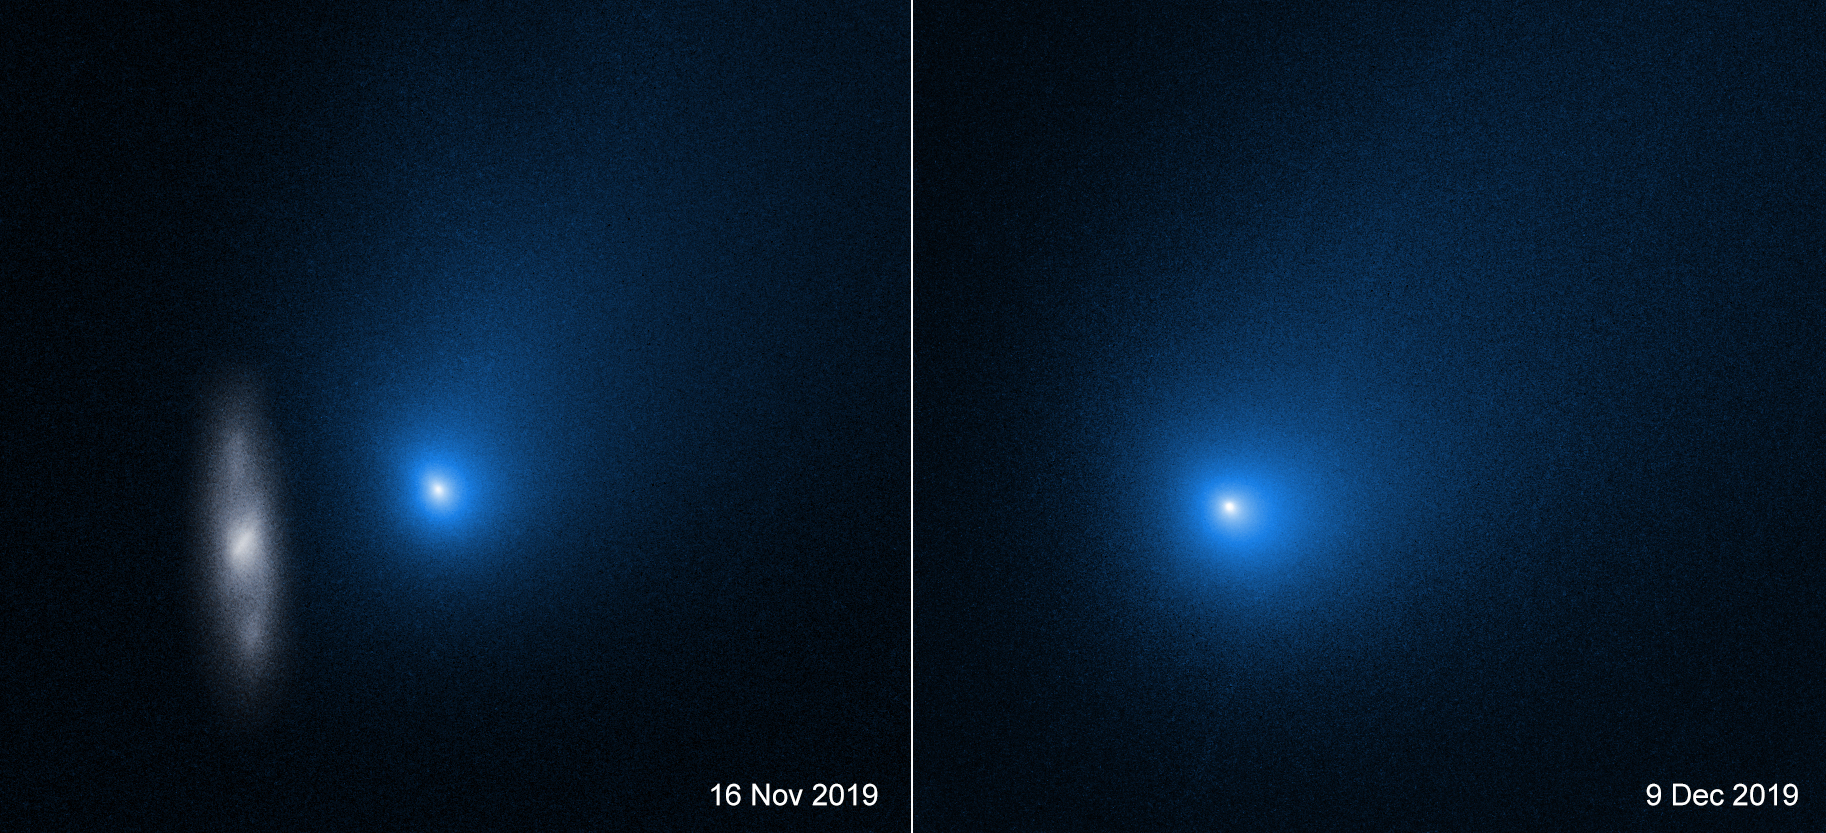 Comet 2I/Borisov, captured here in two separate images from NASA’s Hubble Space Telescope, including one with a background galaxy (left), is the second interstellar object known to enter our solar system. 